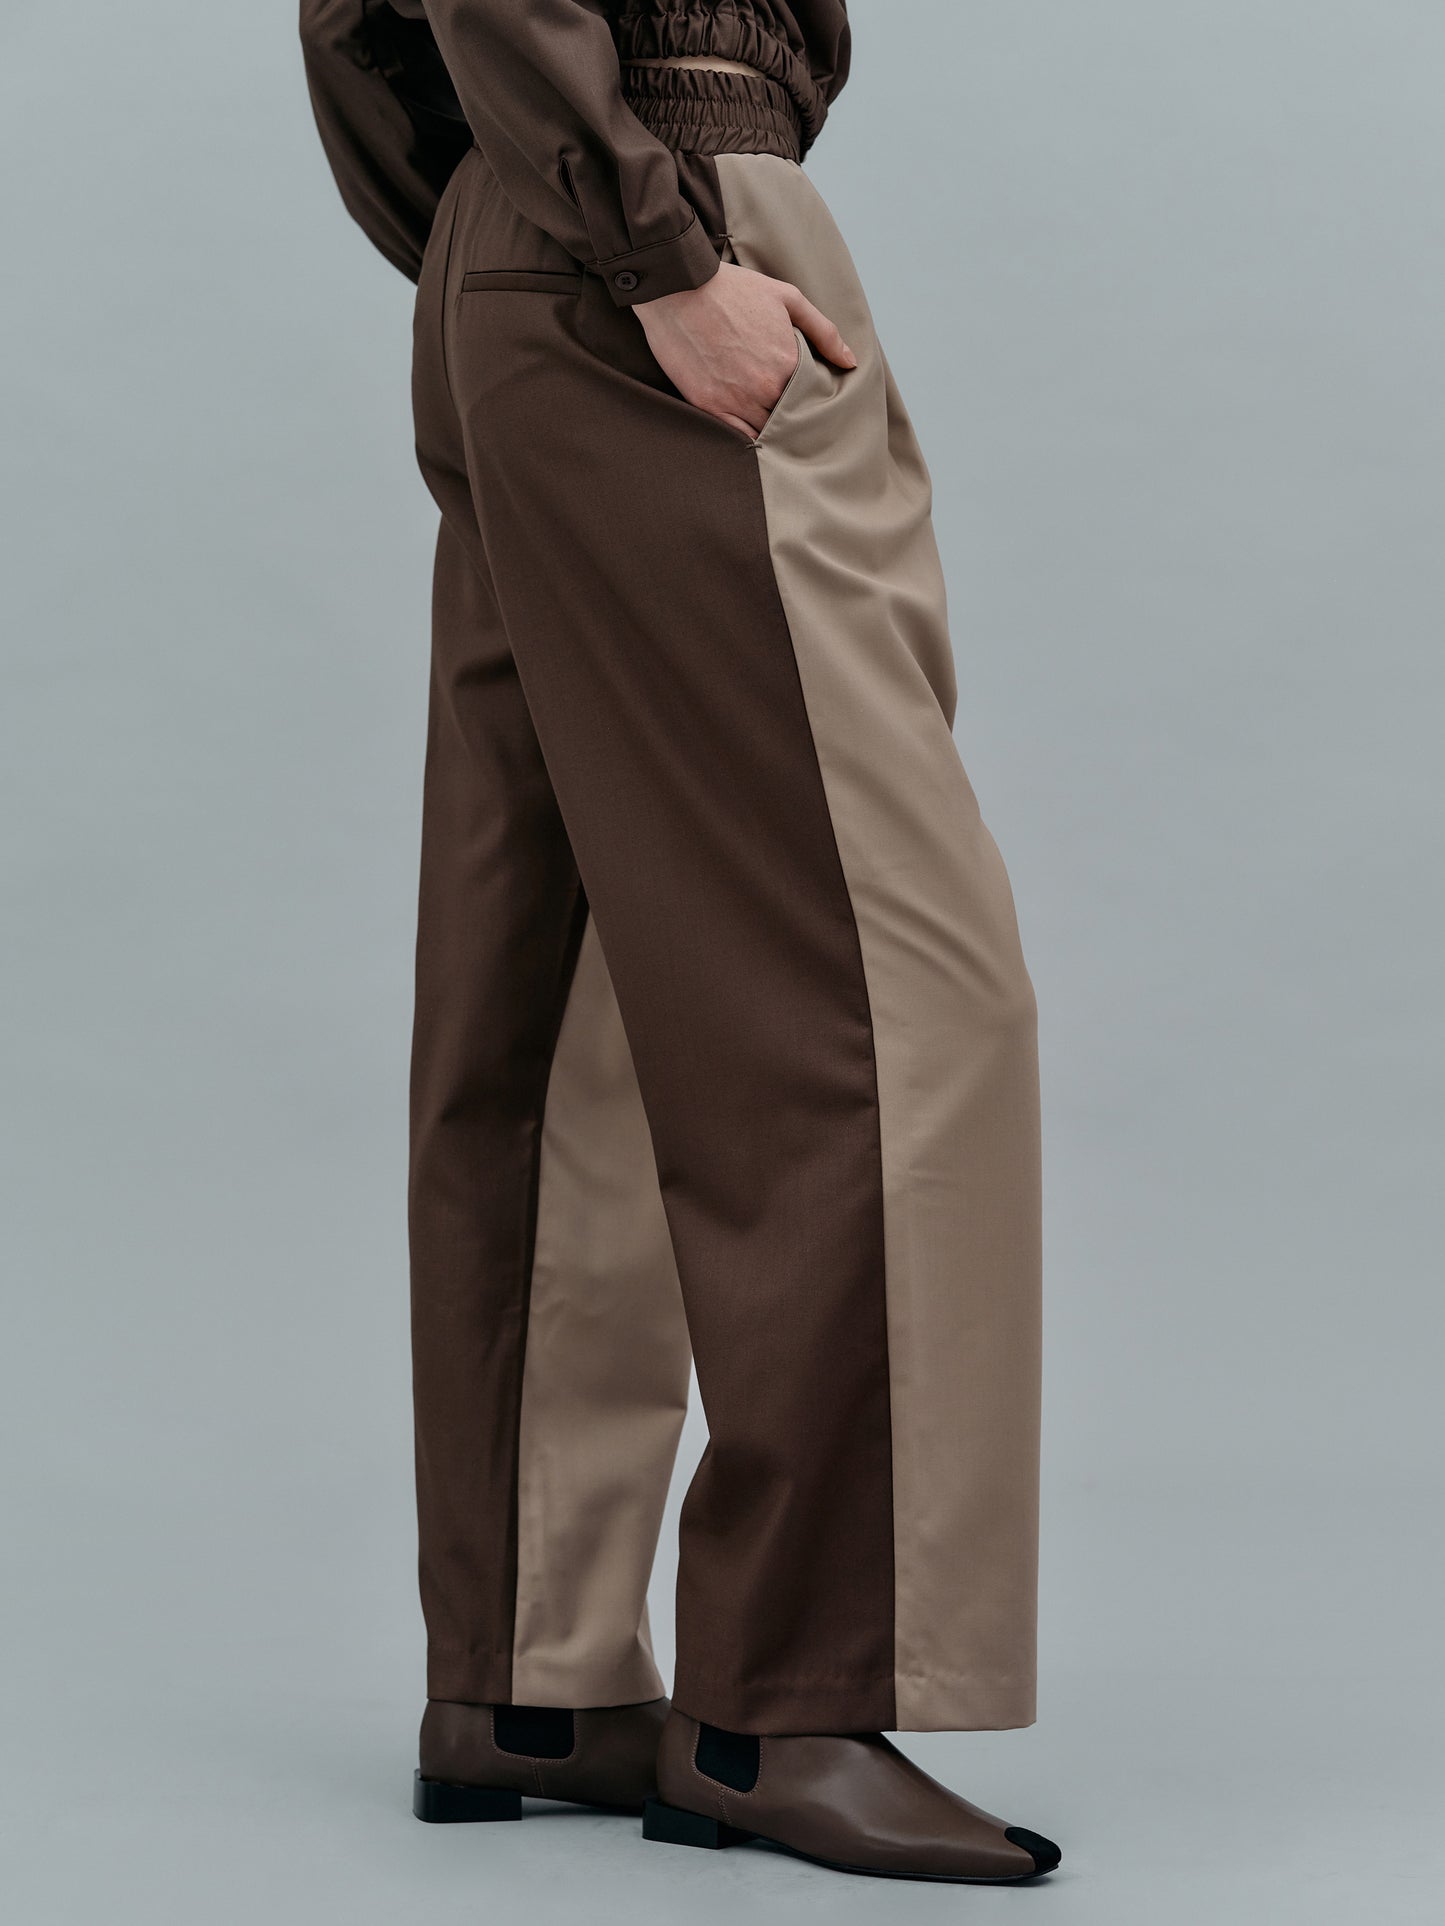 Bicolor Track Pants, Ecru & Hickory – SourceUnknown